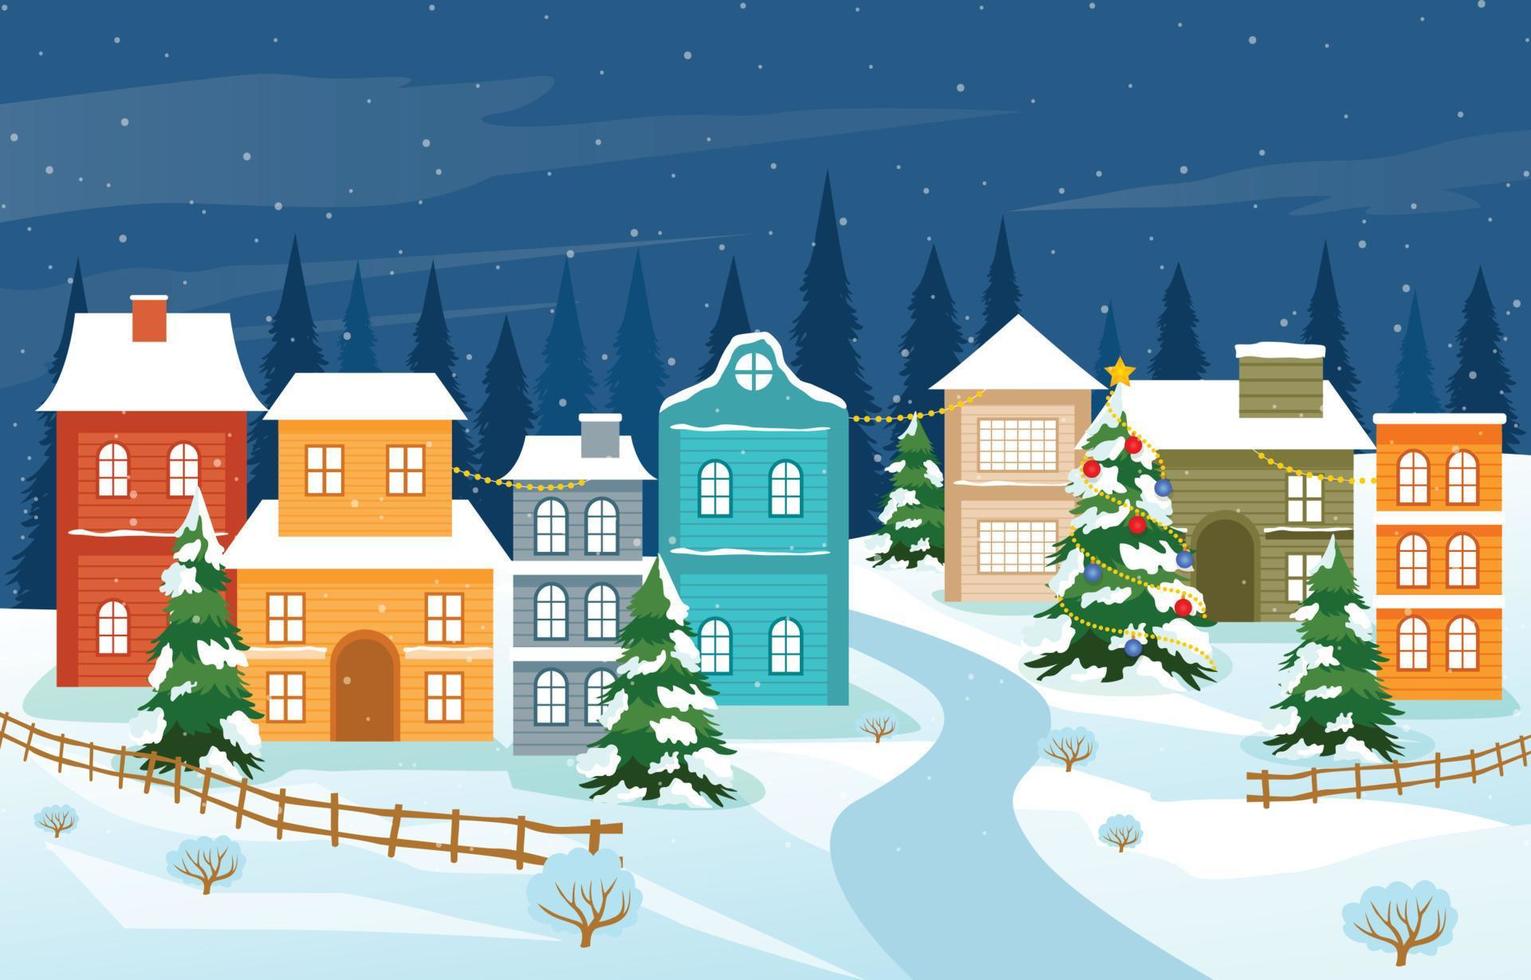 Christmas on a Little Town Landscape Background vector